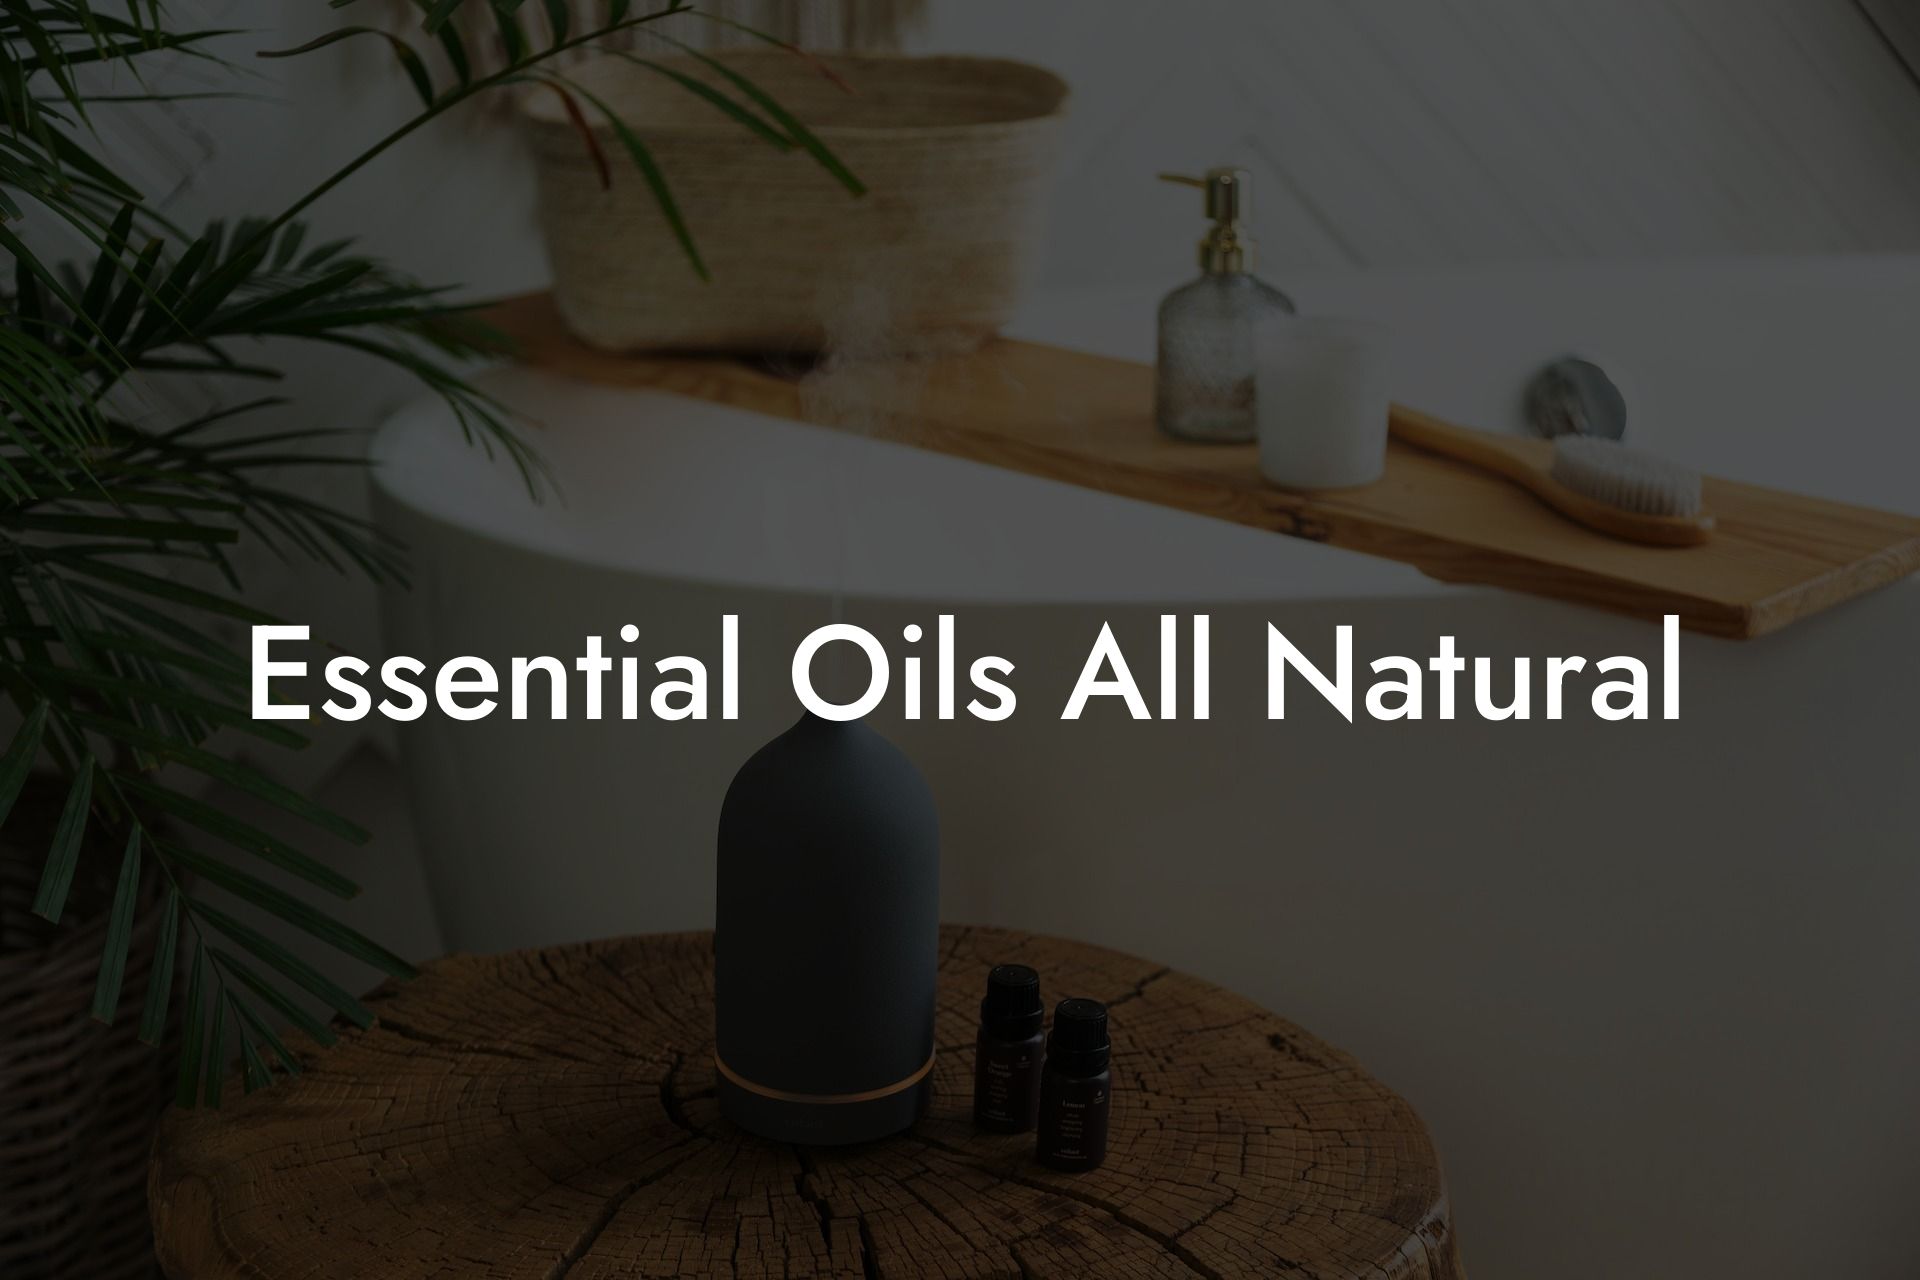 Essential Oils All Natural